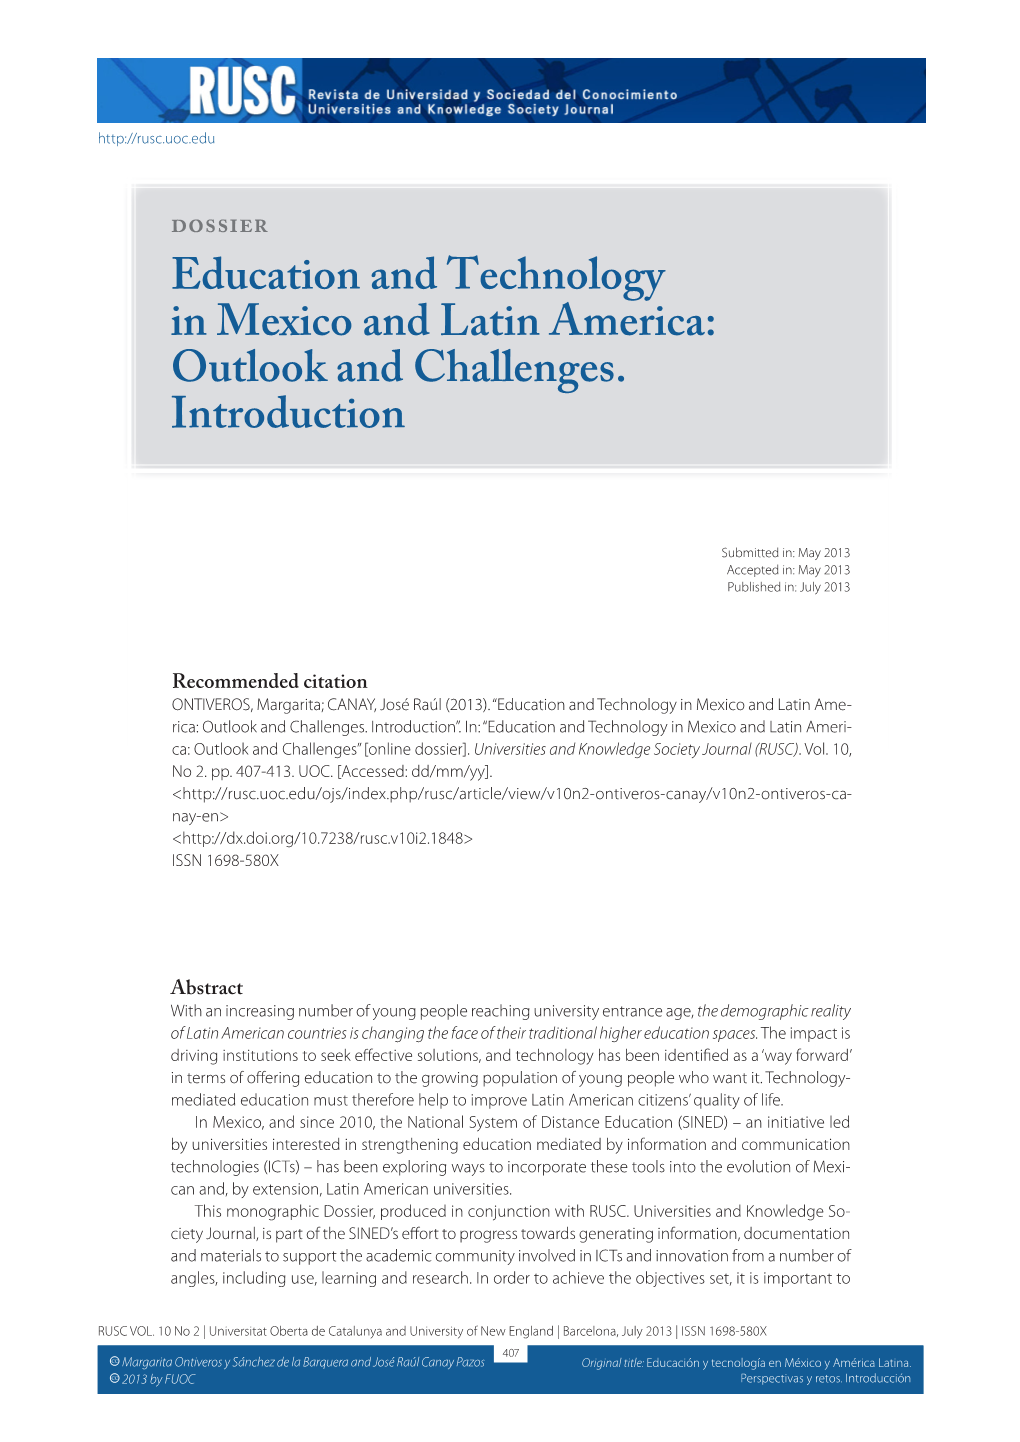 Education and Technology in Mexico and Latin America: Outlook and Challenges